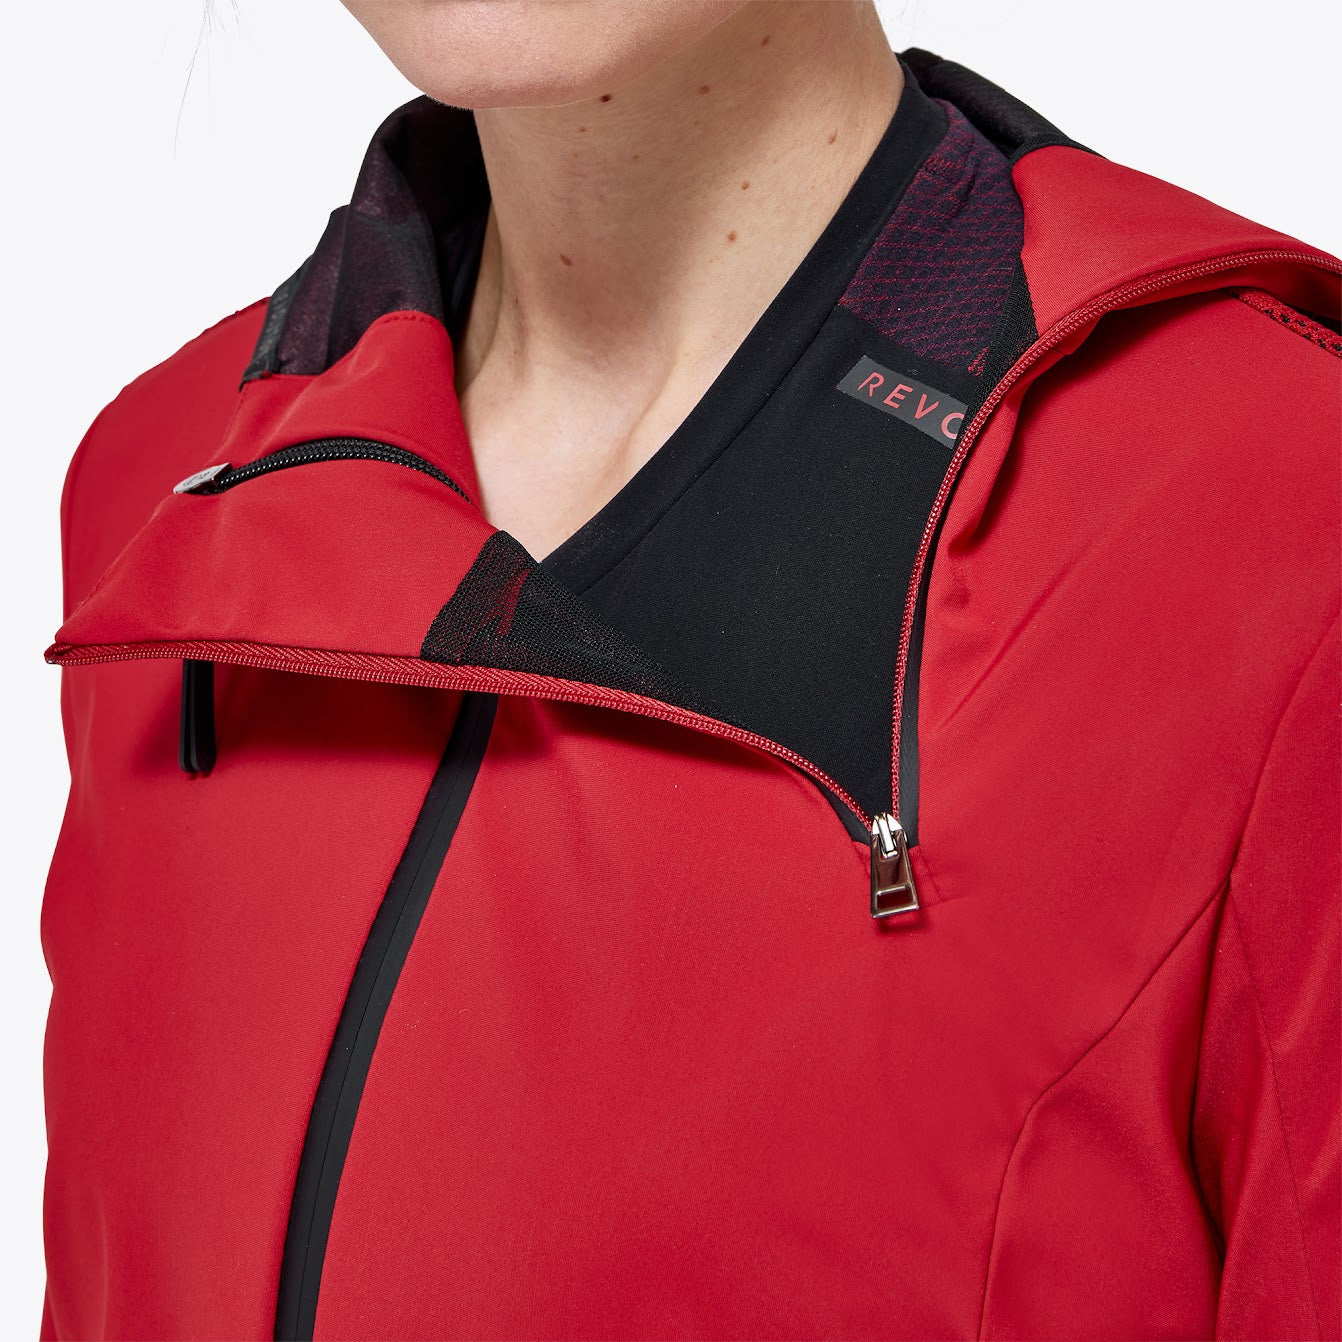 The Cavalleria Toscana Red Revo Jersey Tech Knit Hooded Soft shell jacket is so versatile. The iconic Revo mesh back gives mum movement and flexibility. Side zips and optional neck opening and zip pockets make this jacked is exceptional practical and functional too. As well as looking stylish and on trend.